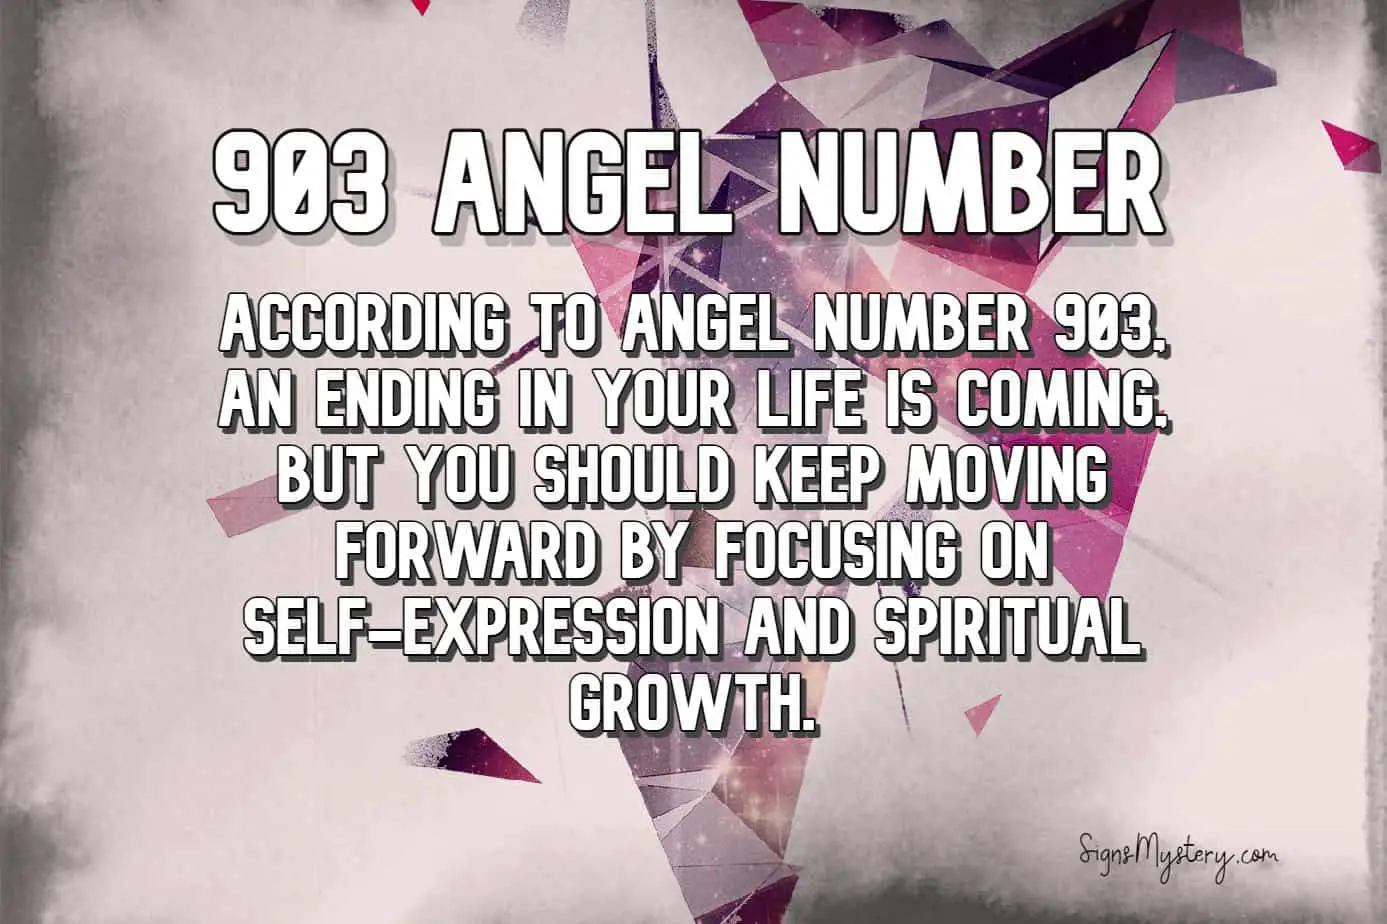 903 angel number meaning